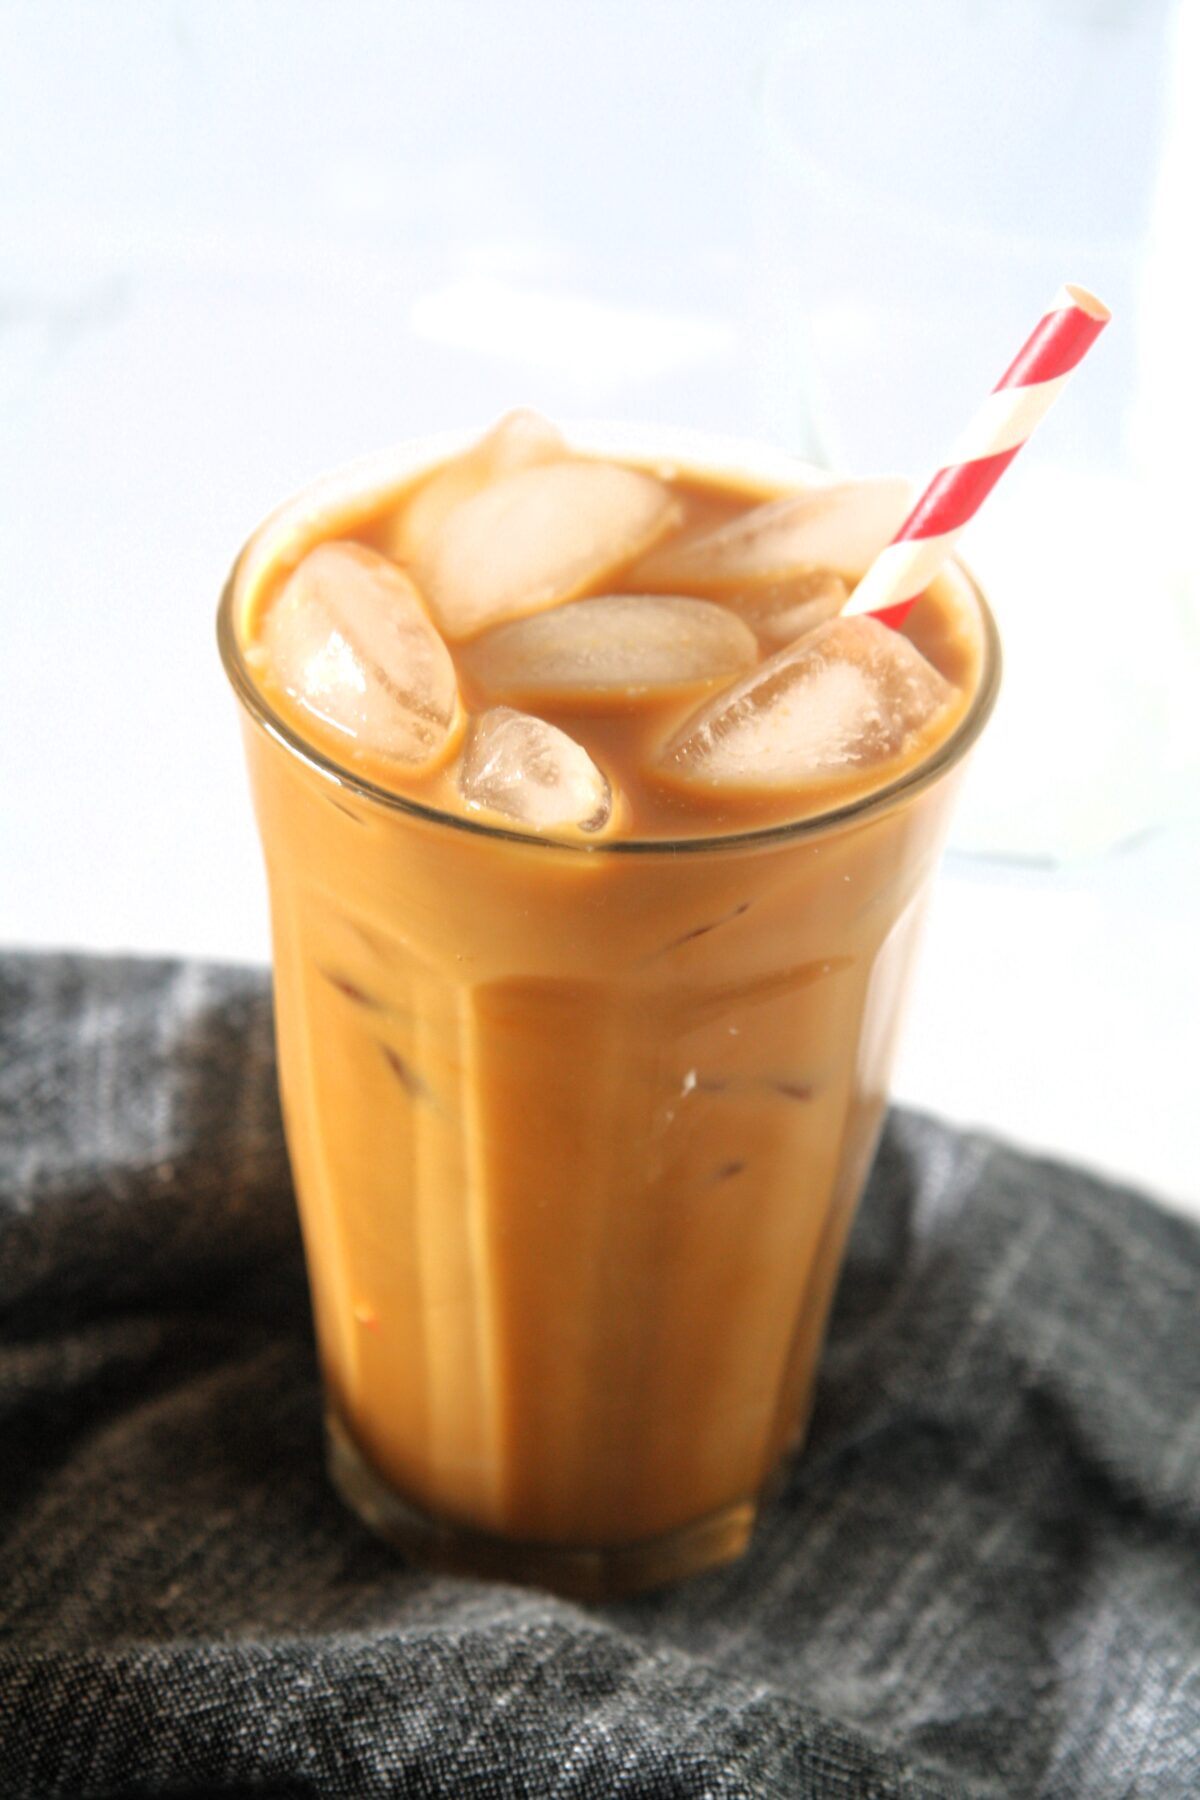 Iced coffee has become a popular beverage in the modern coffee culture among coffee lovers. But is it bad for your health if you drink iced coffee everyday?